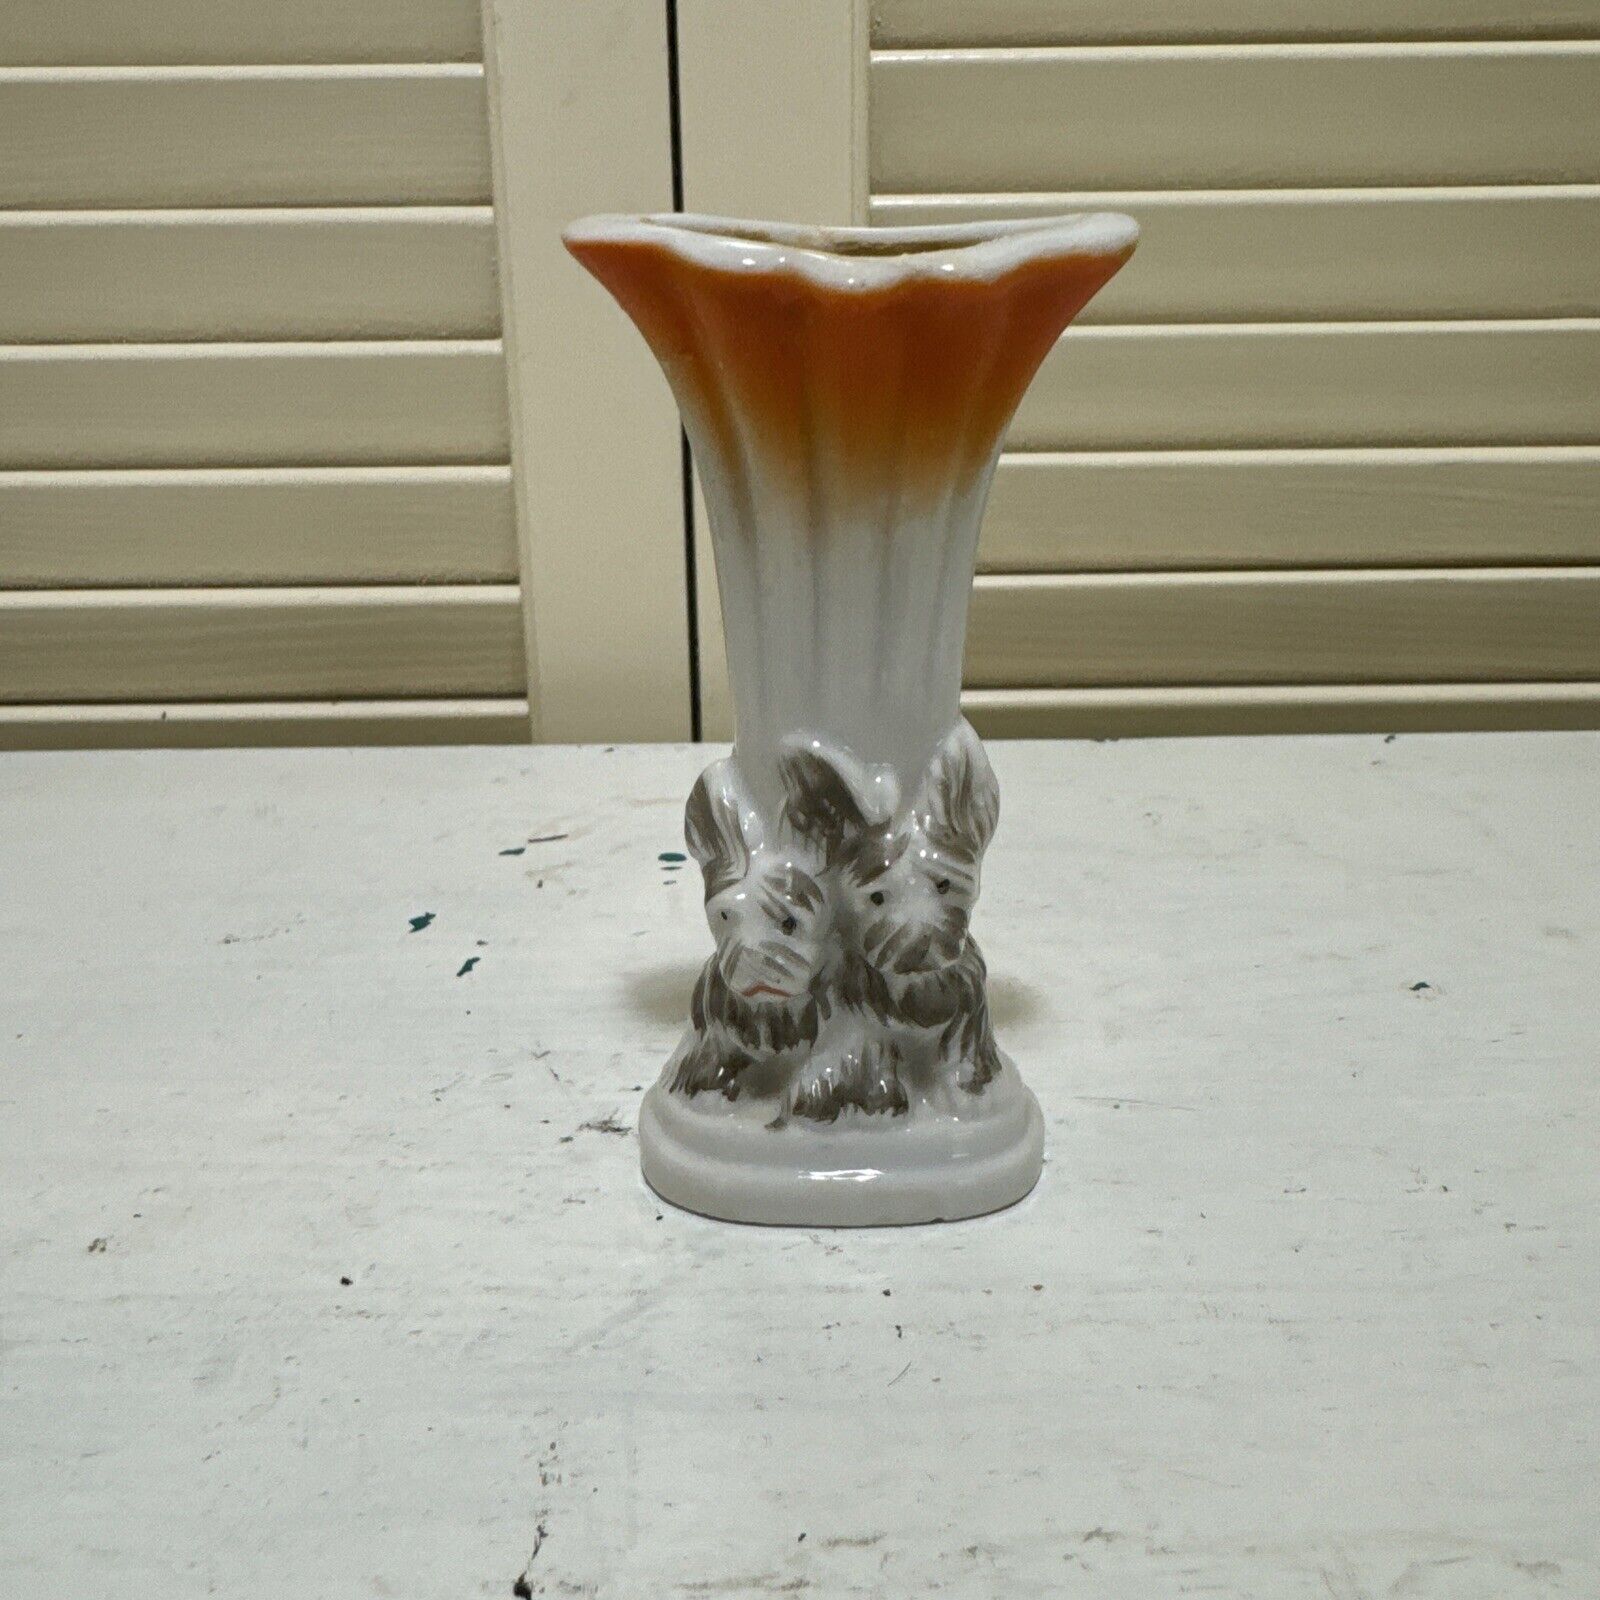 Vintage Miniture Ceramic Vase with a Pair of Puppy Dogs at the Bottom.